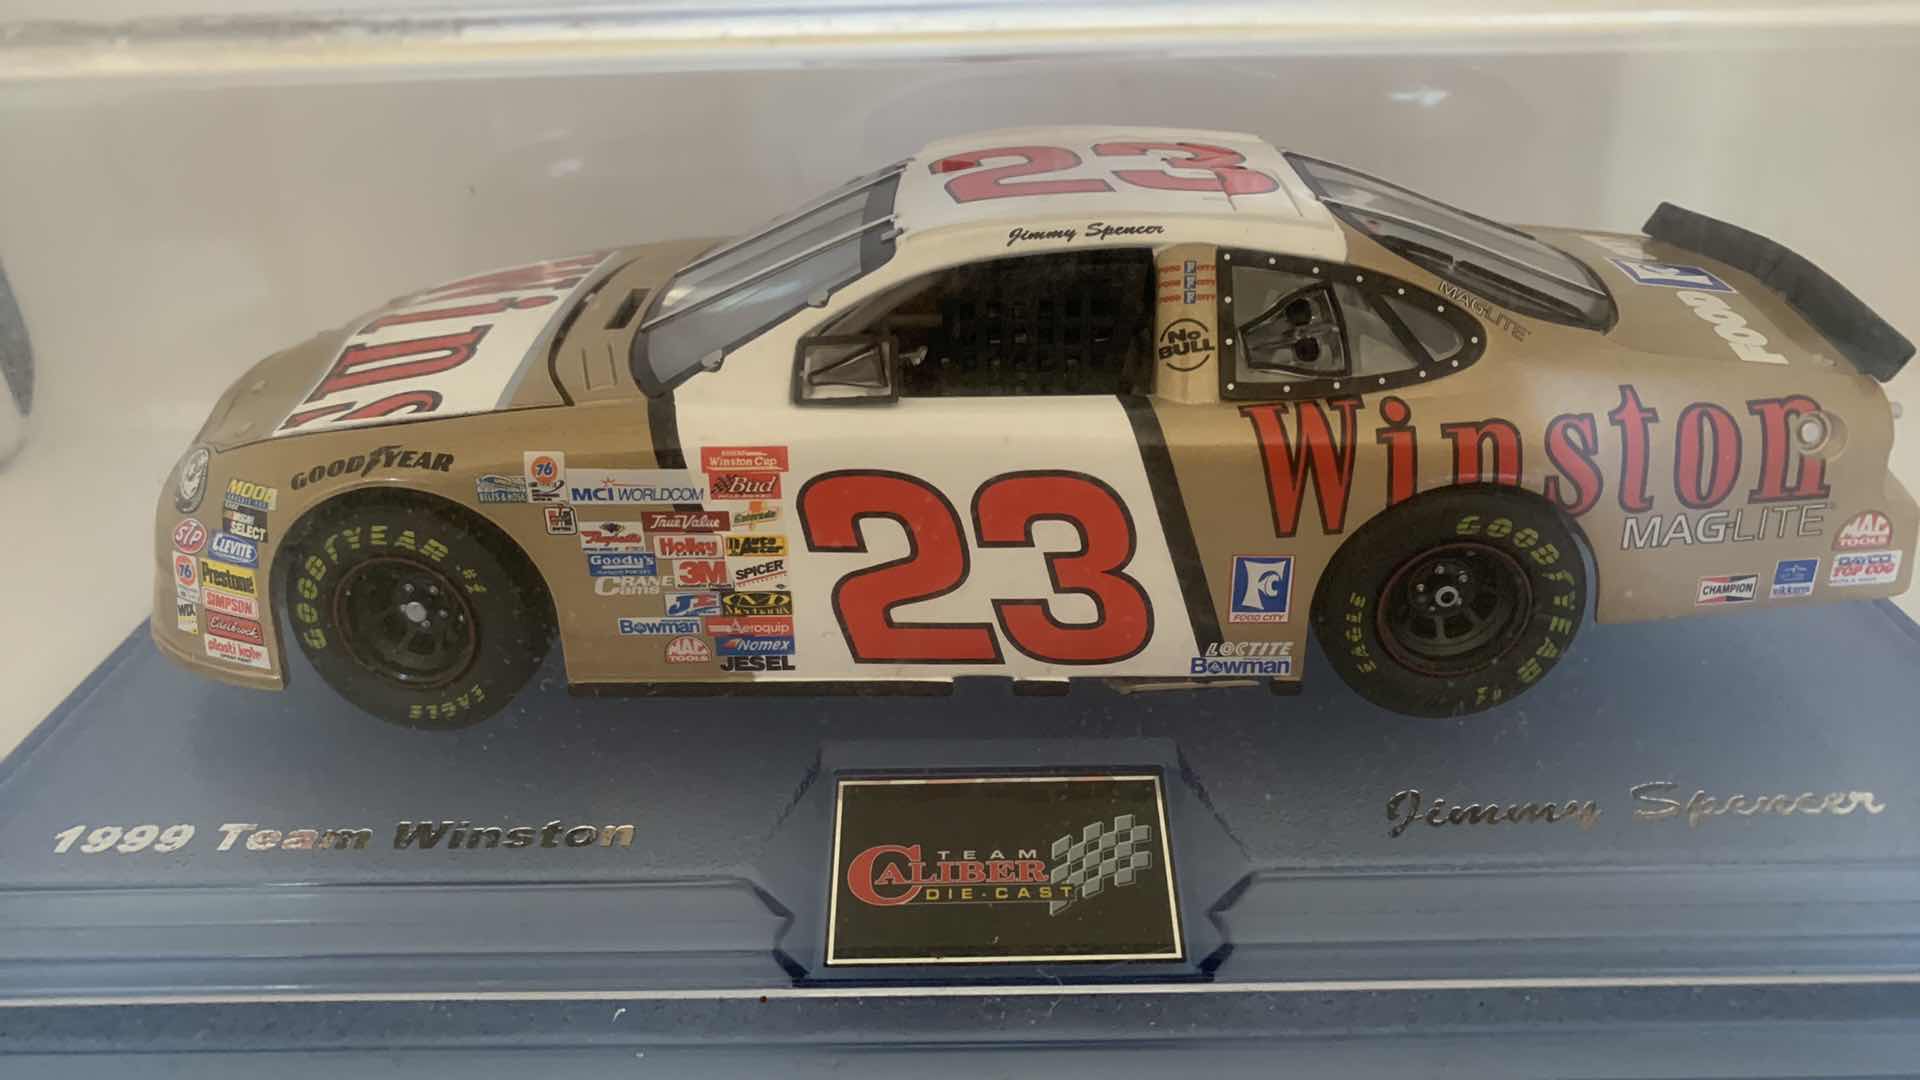 Photo 2 of 1999 TEAM WINSTON #23 JIMMY SPENCER DIE CAST CAR IN SHOW CASE.